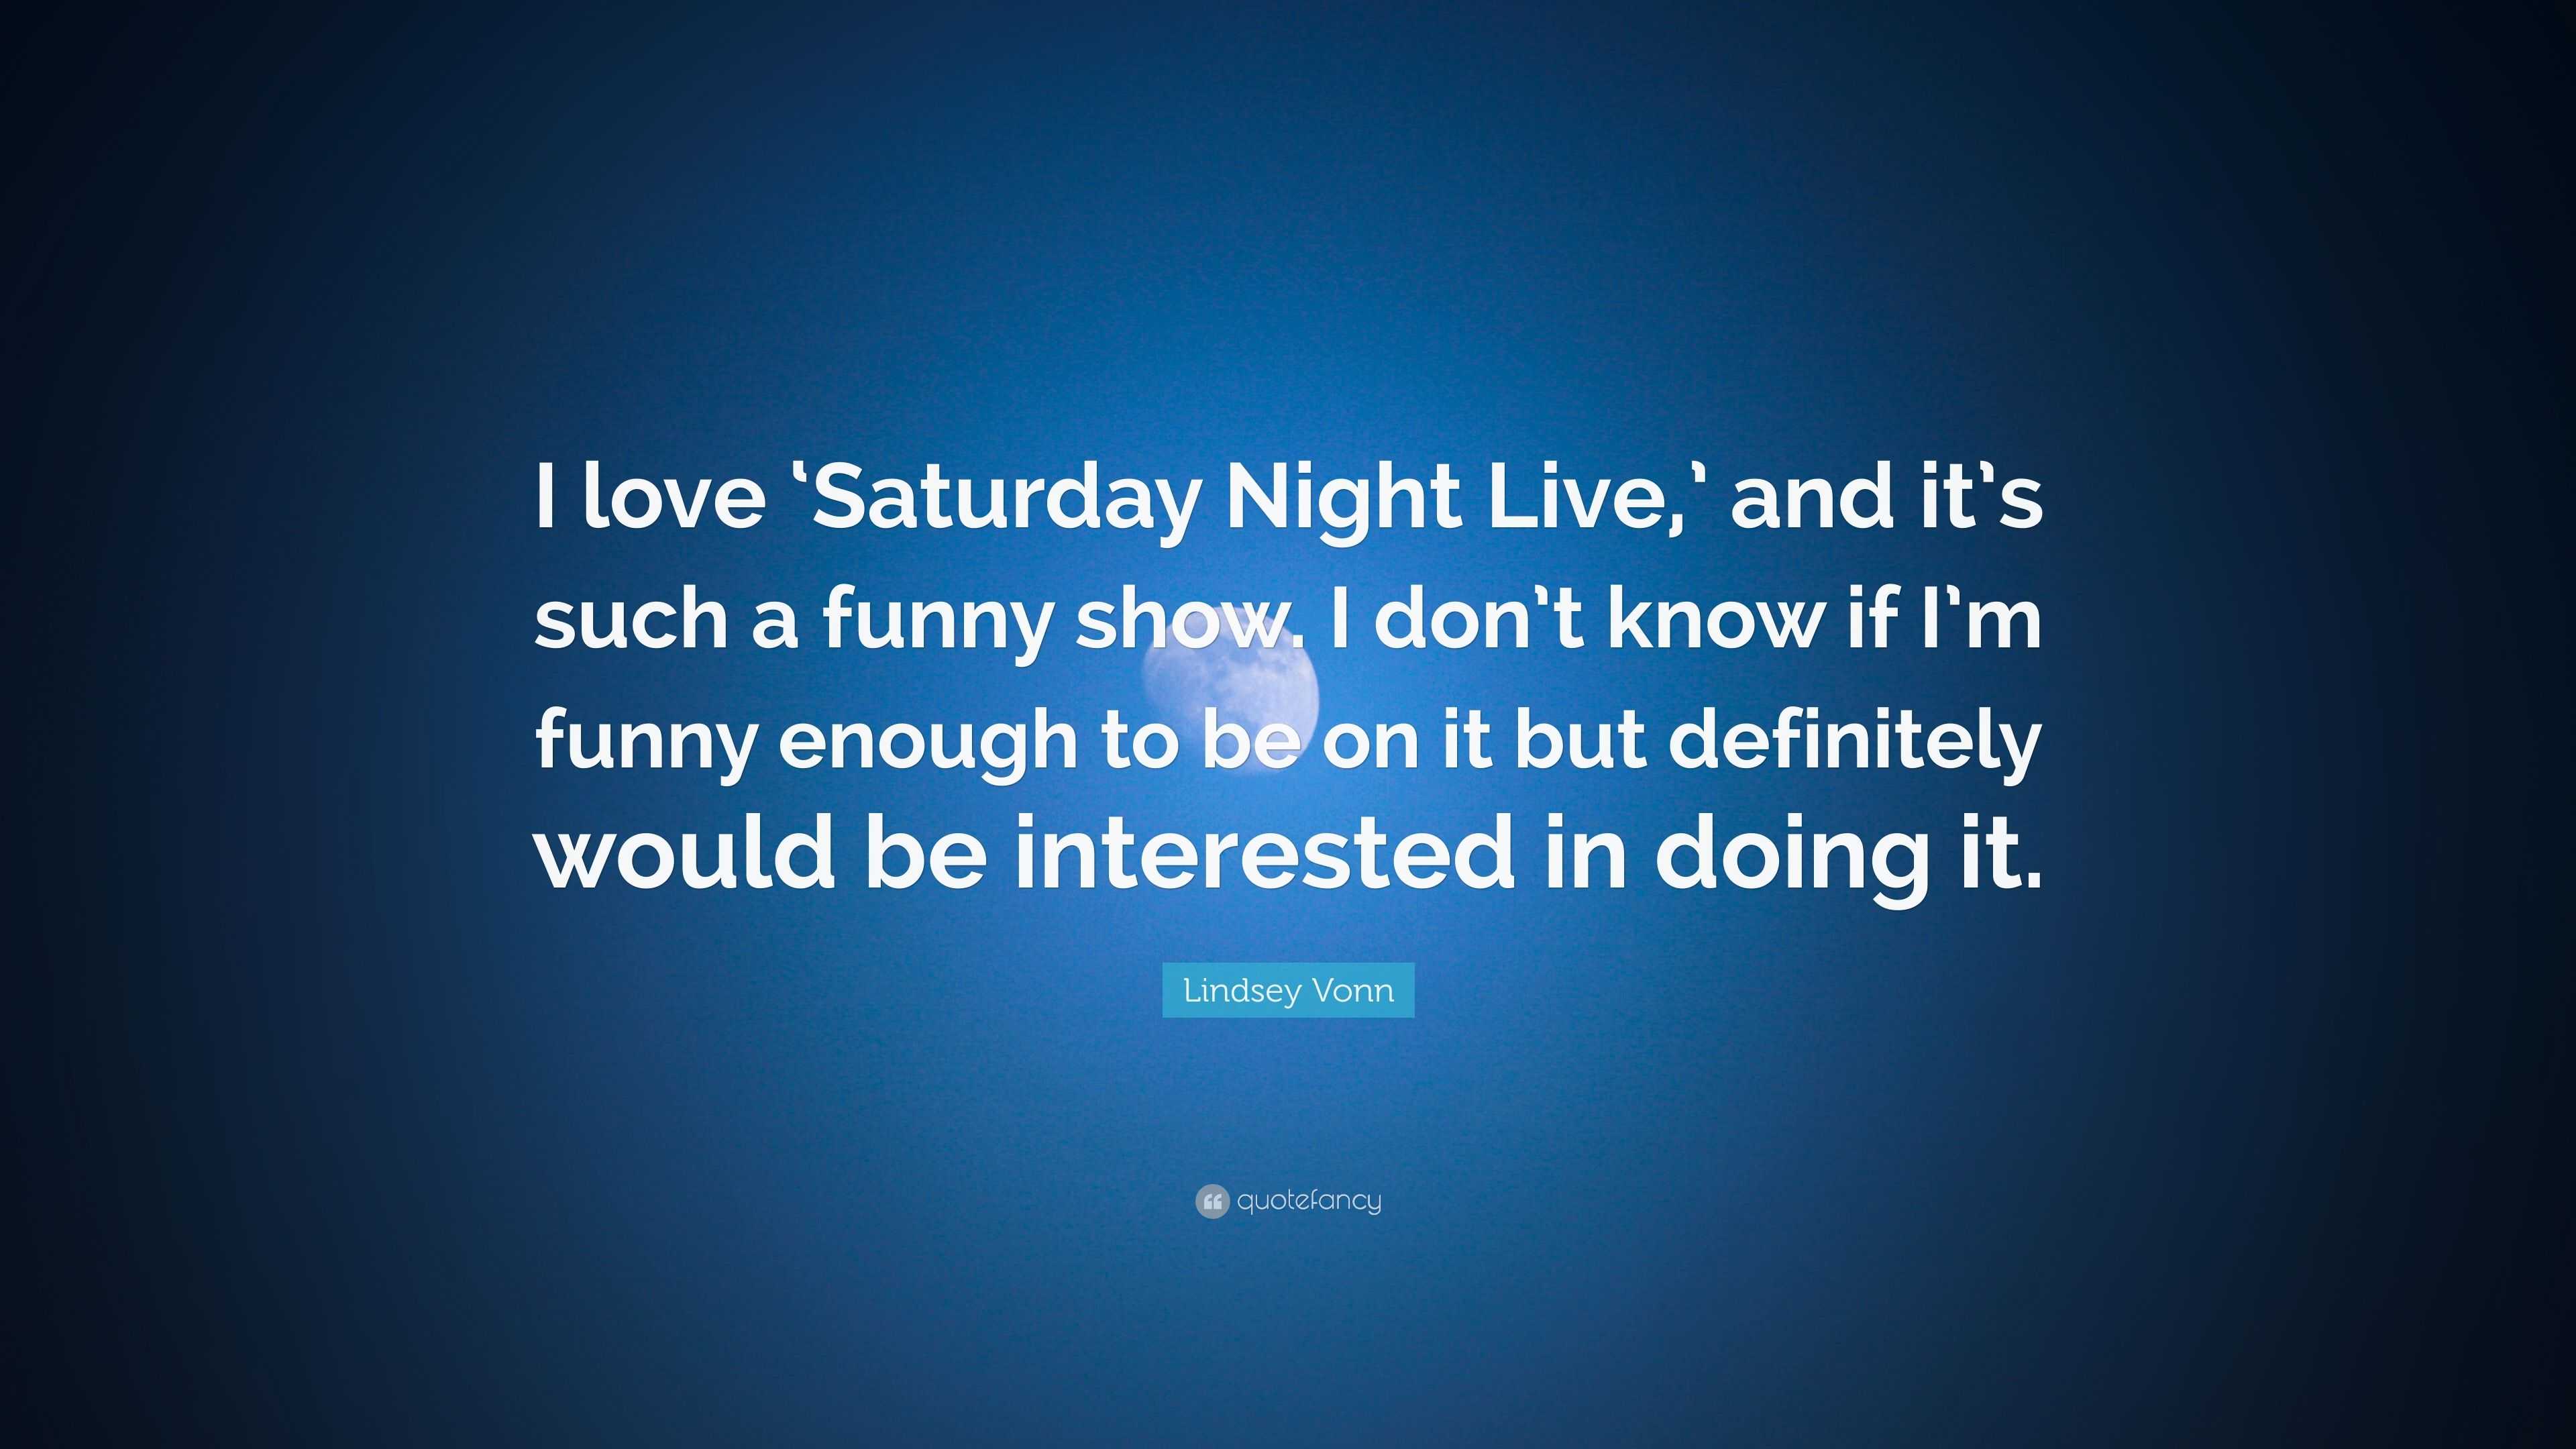 Lindsey Vonn Quote: “I love 'Saturday Night Live,' and it's such a funny  show. I don't know if I'm funny enough to be on it but definitely wo...”